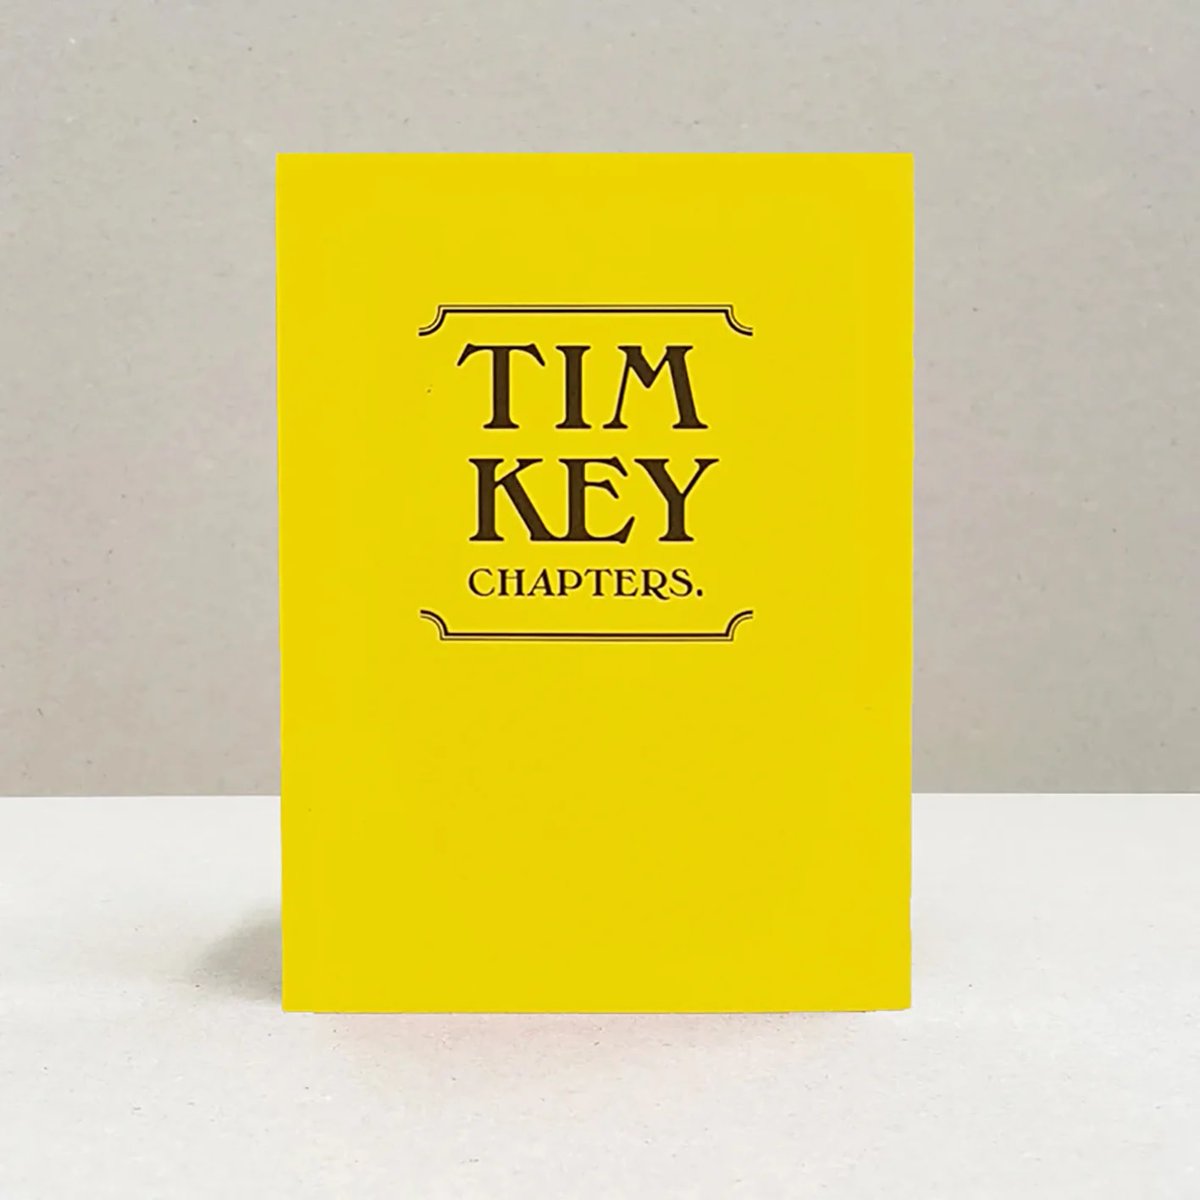 A Valentine's present for you all: @timkeyperson's latest book CHAPTERS publishes TOMORROW and we have signed copies! Pre-order your copy here: lrb.me/p83